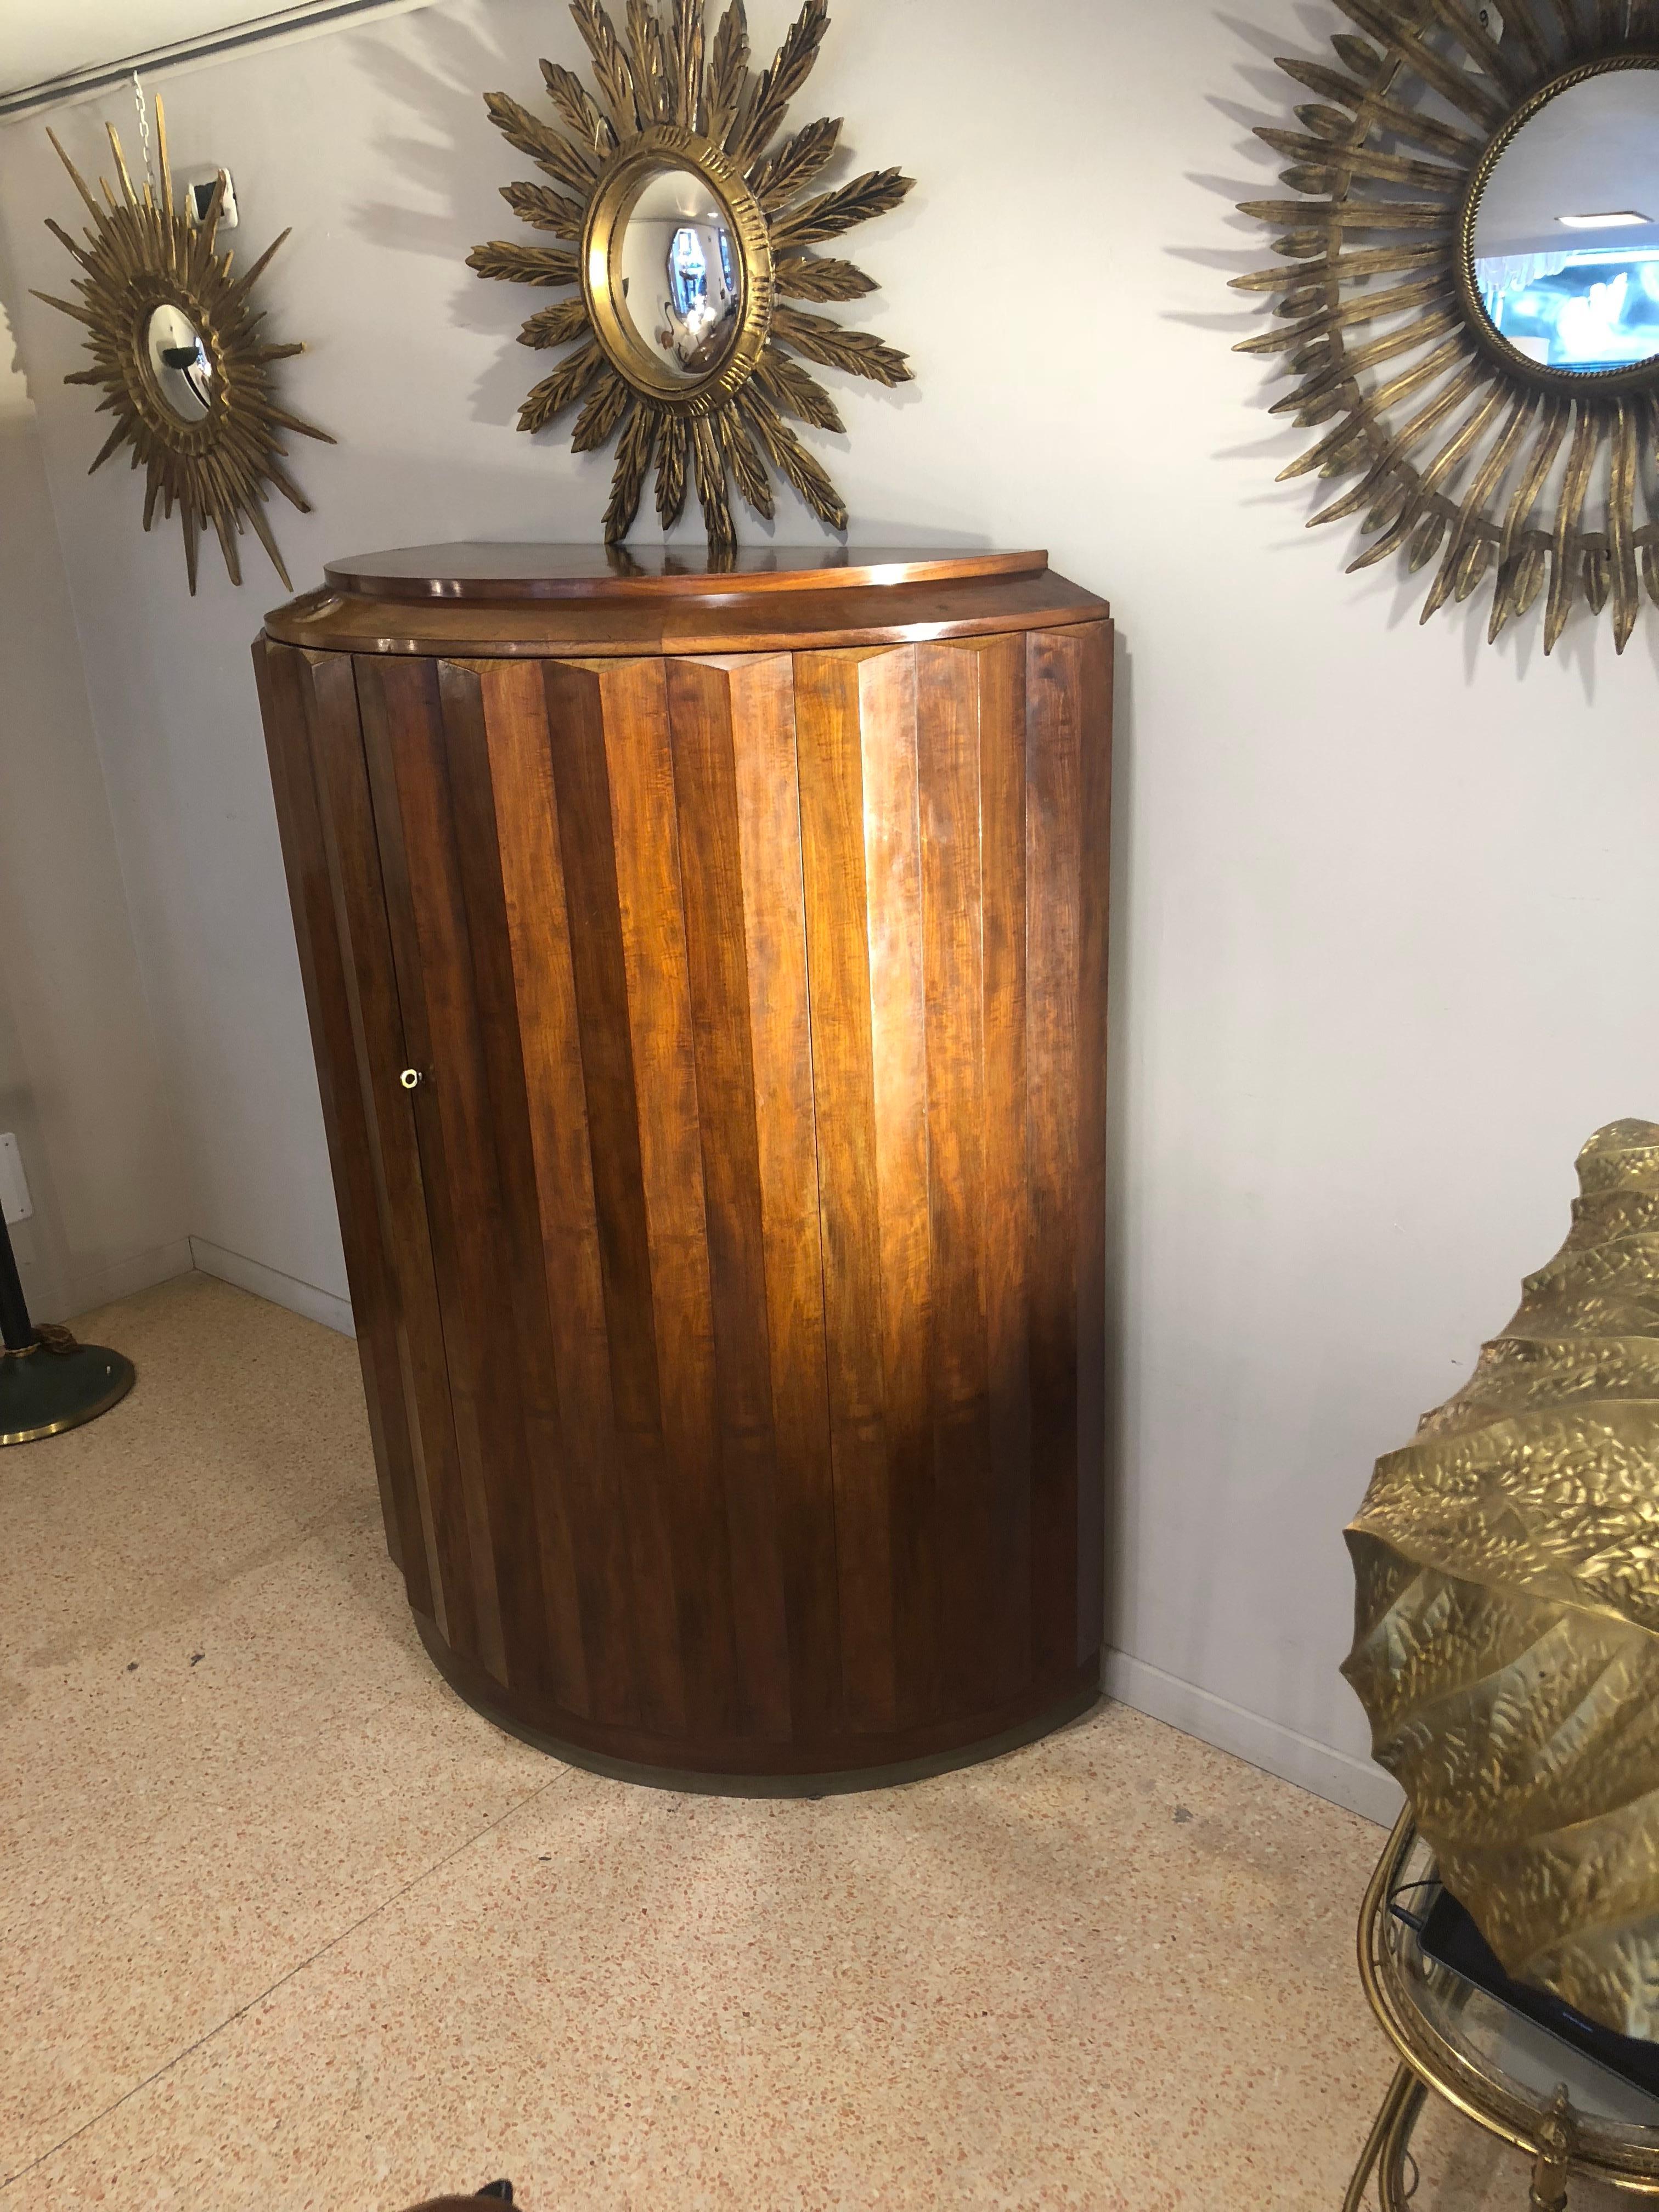 Geometrical shape half moon mahoganywood cabinet, from 1930 Art Deco period showing the signature Ruhlman inscribed on the back. Two doors open on a series of half moon shape shelves, original hardware ( keys and lockers). The base, which is